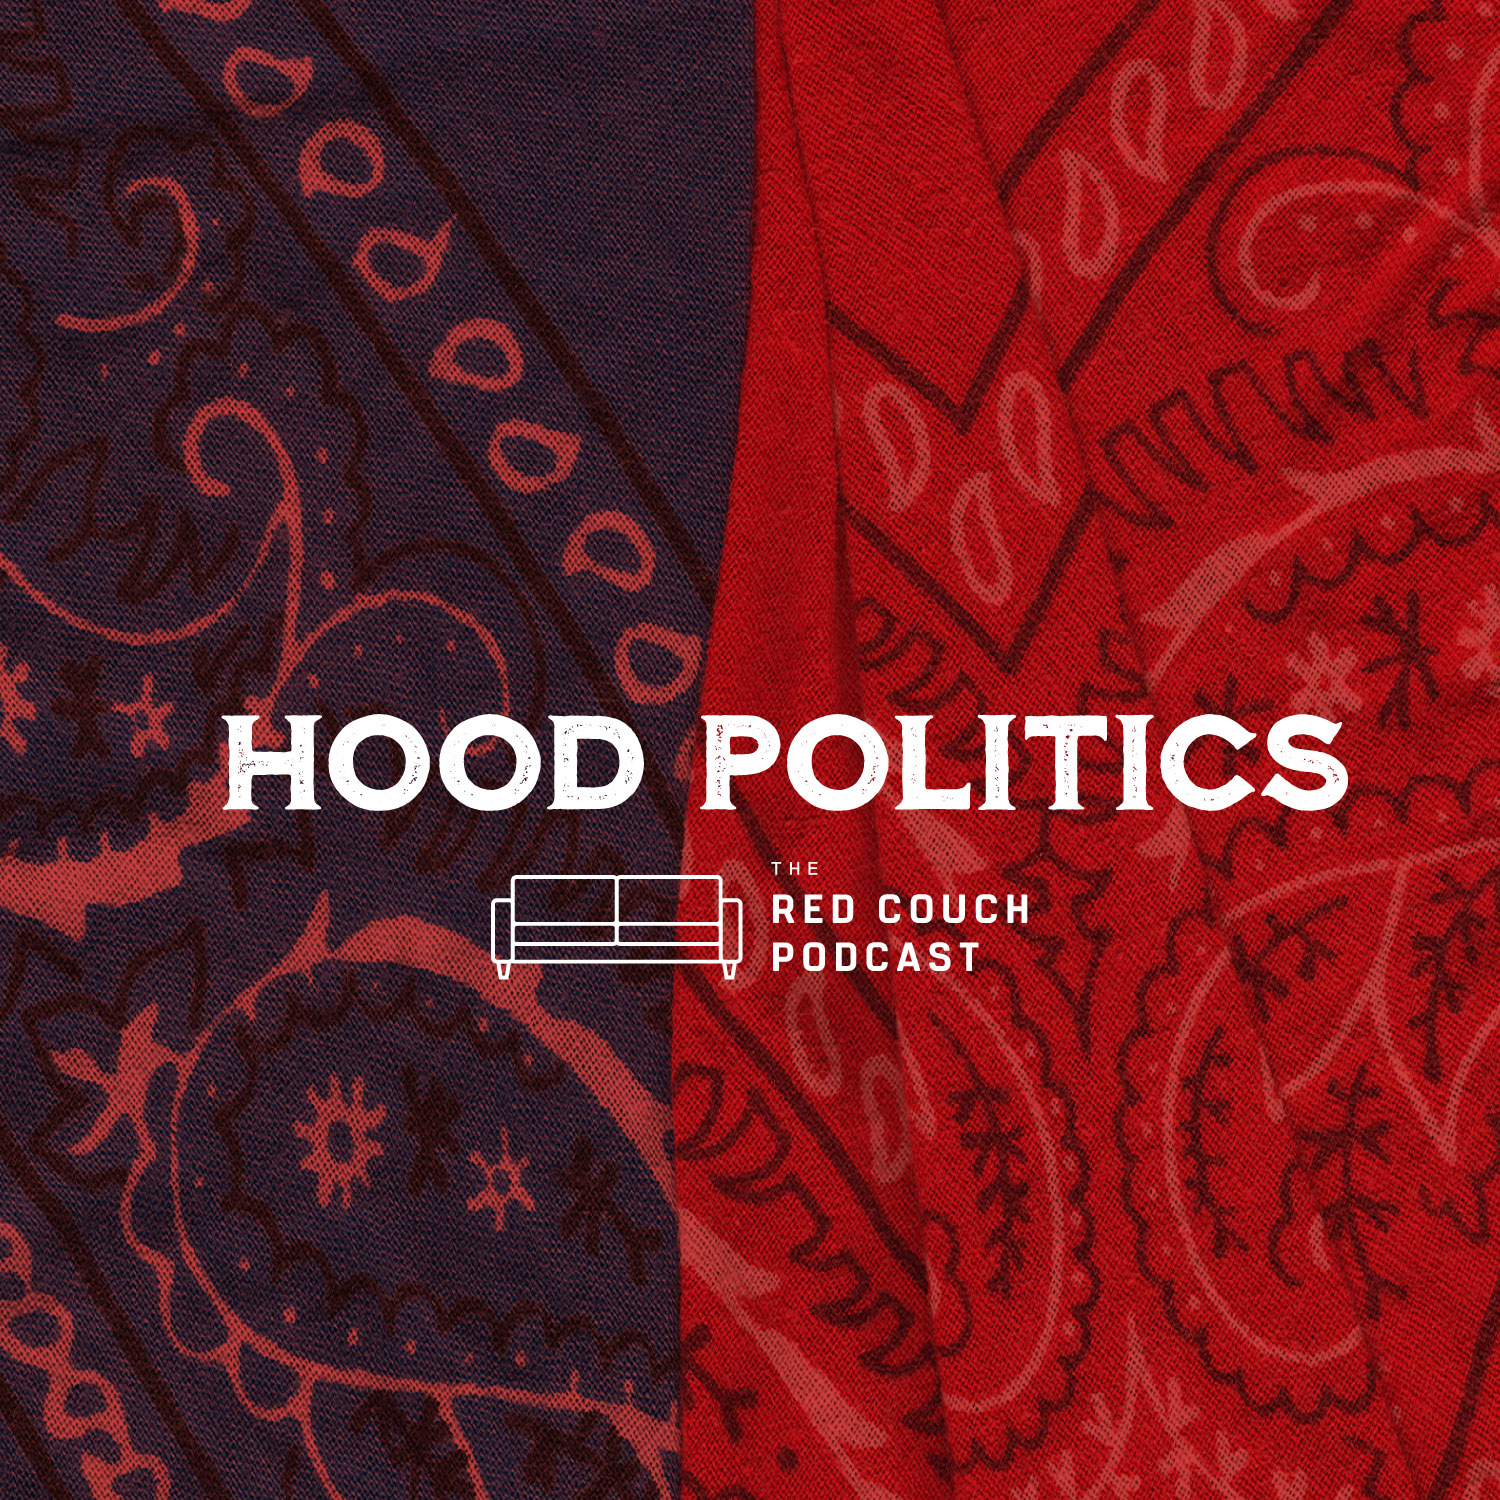 The hood politics with prop's Podcast